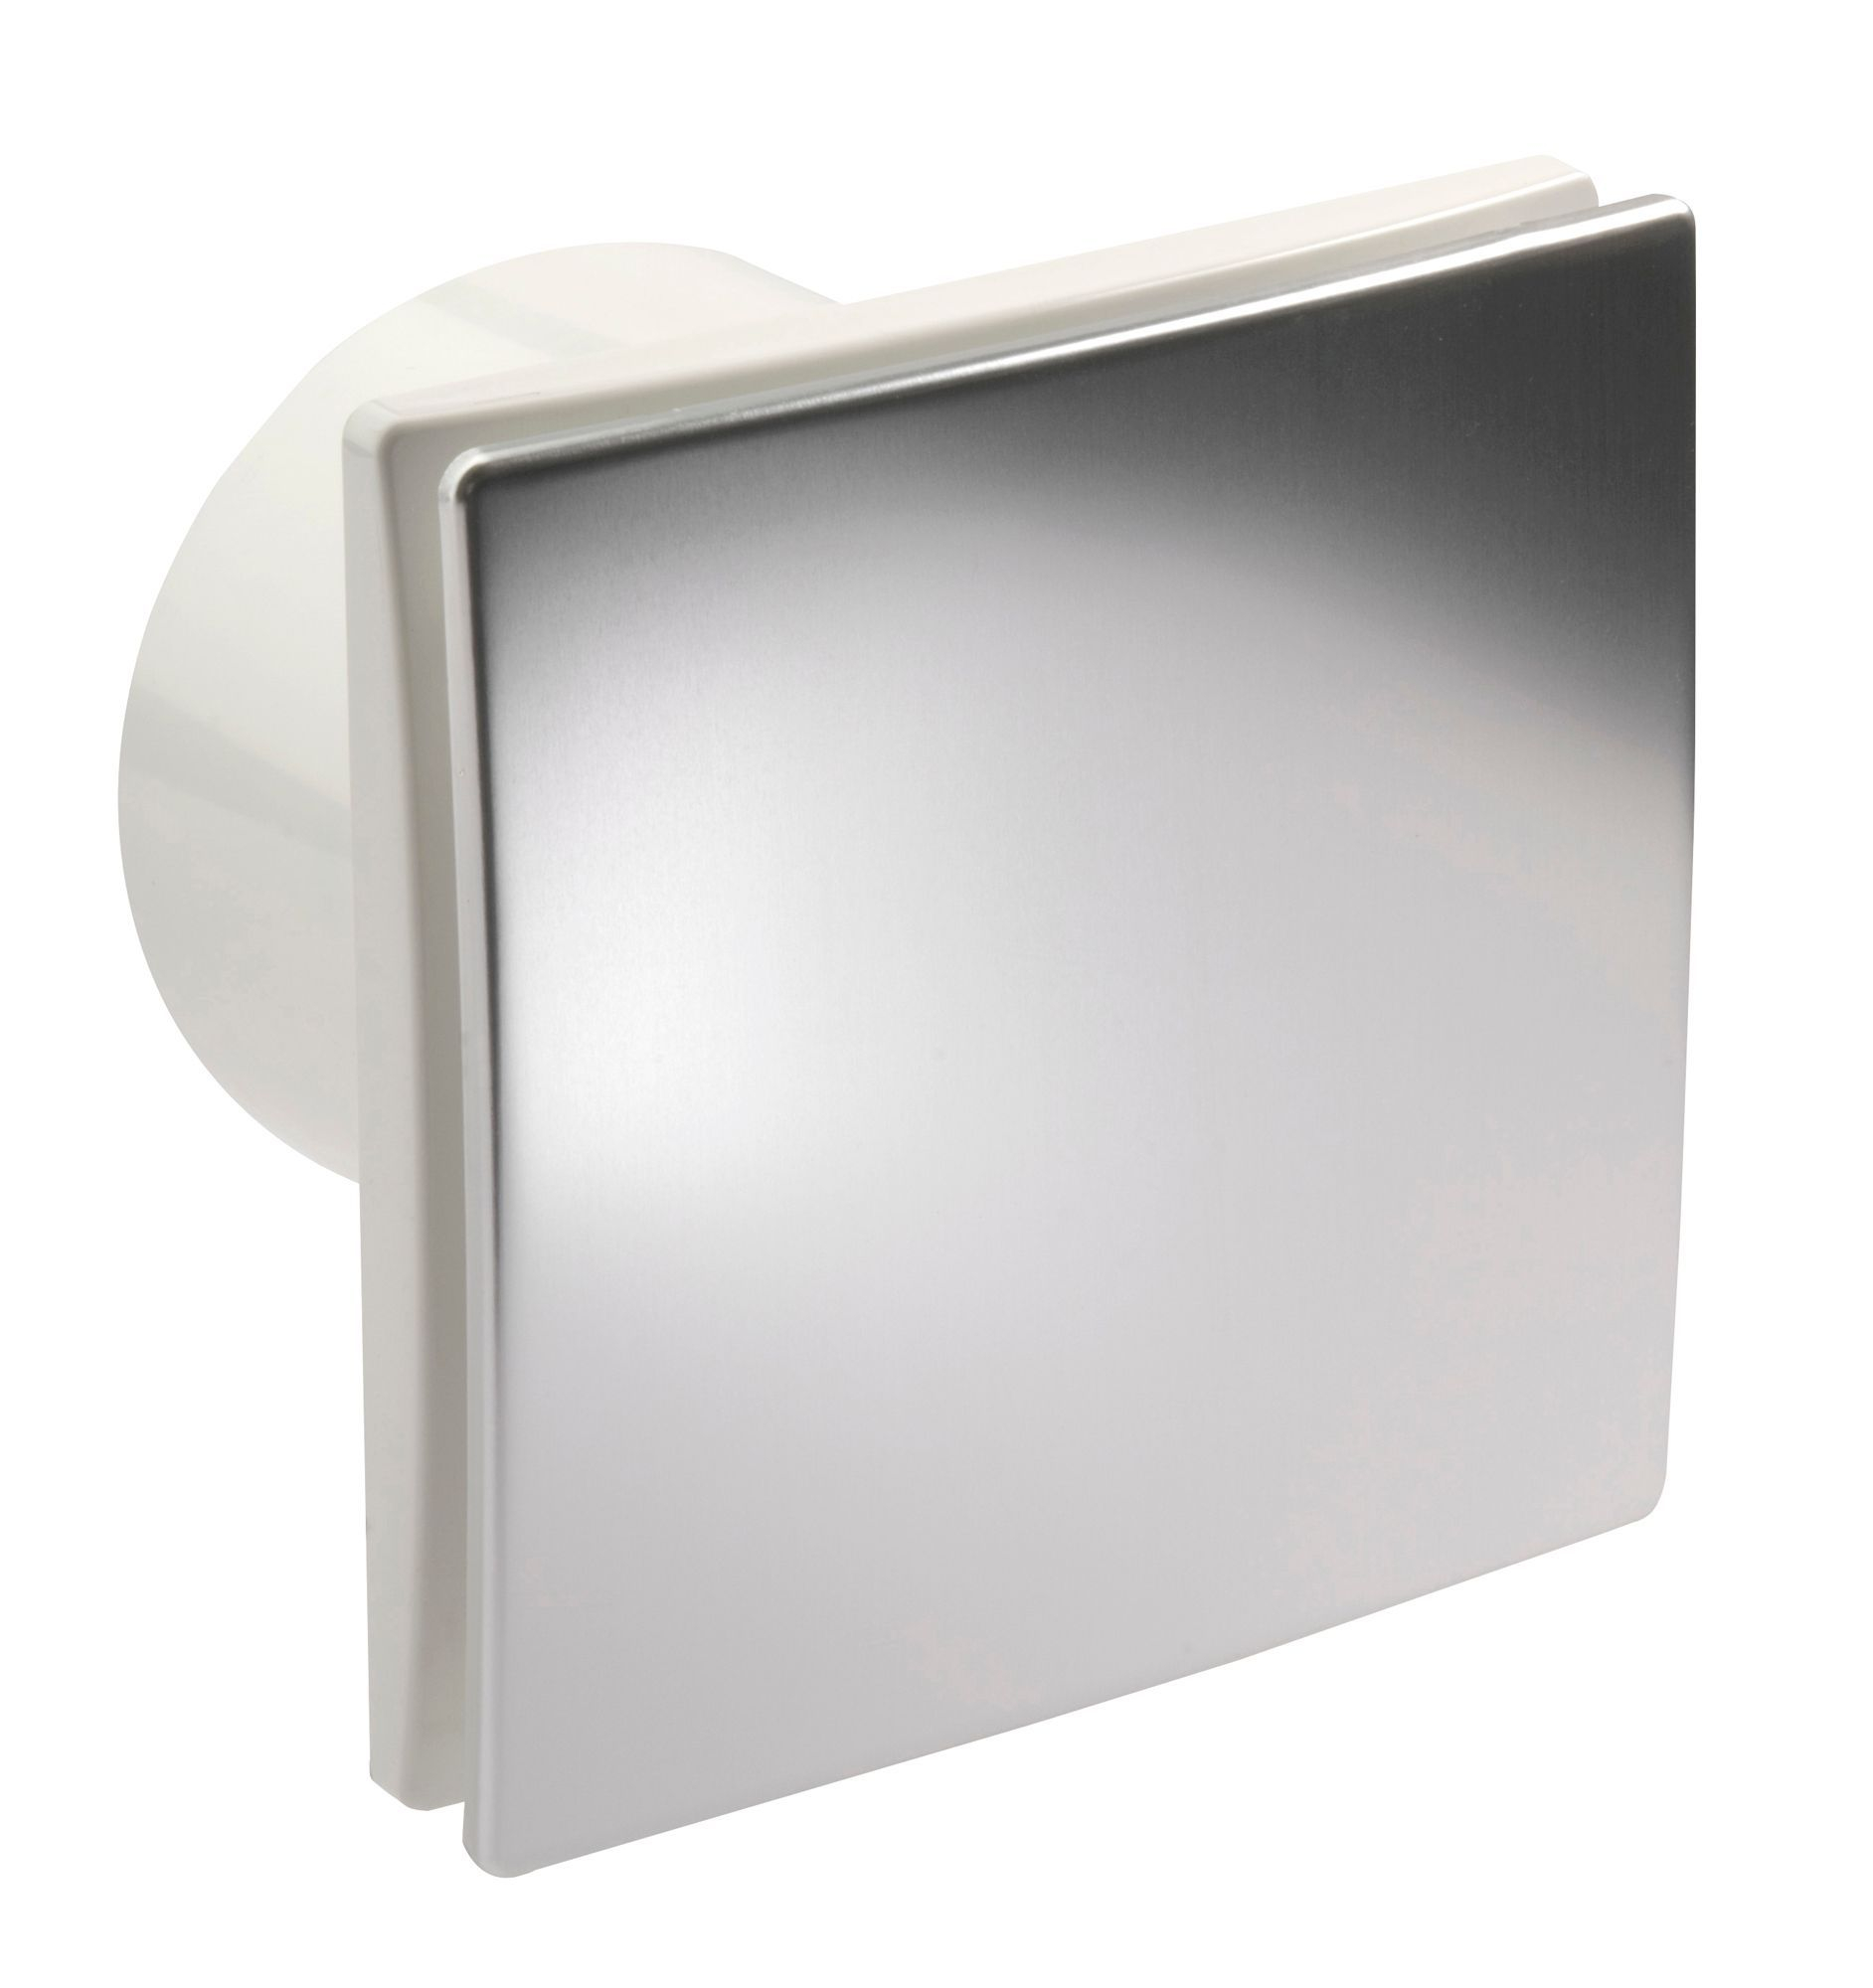 Vent Axia Impression Vimp100t Bathroom Extractor Fan With intended for dimensions 1884 X 2000